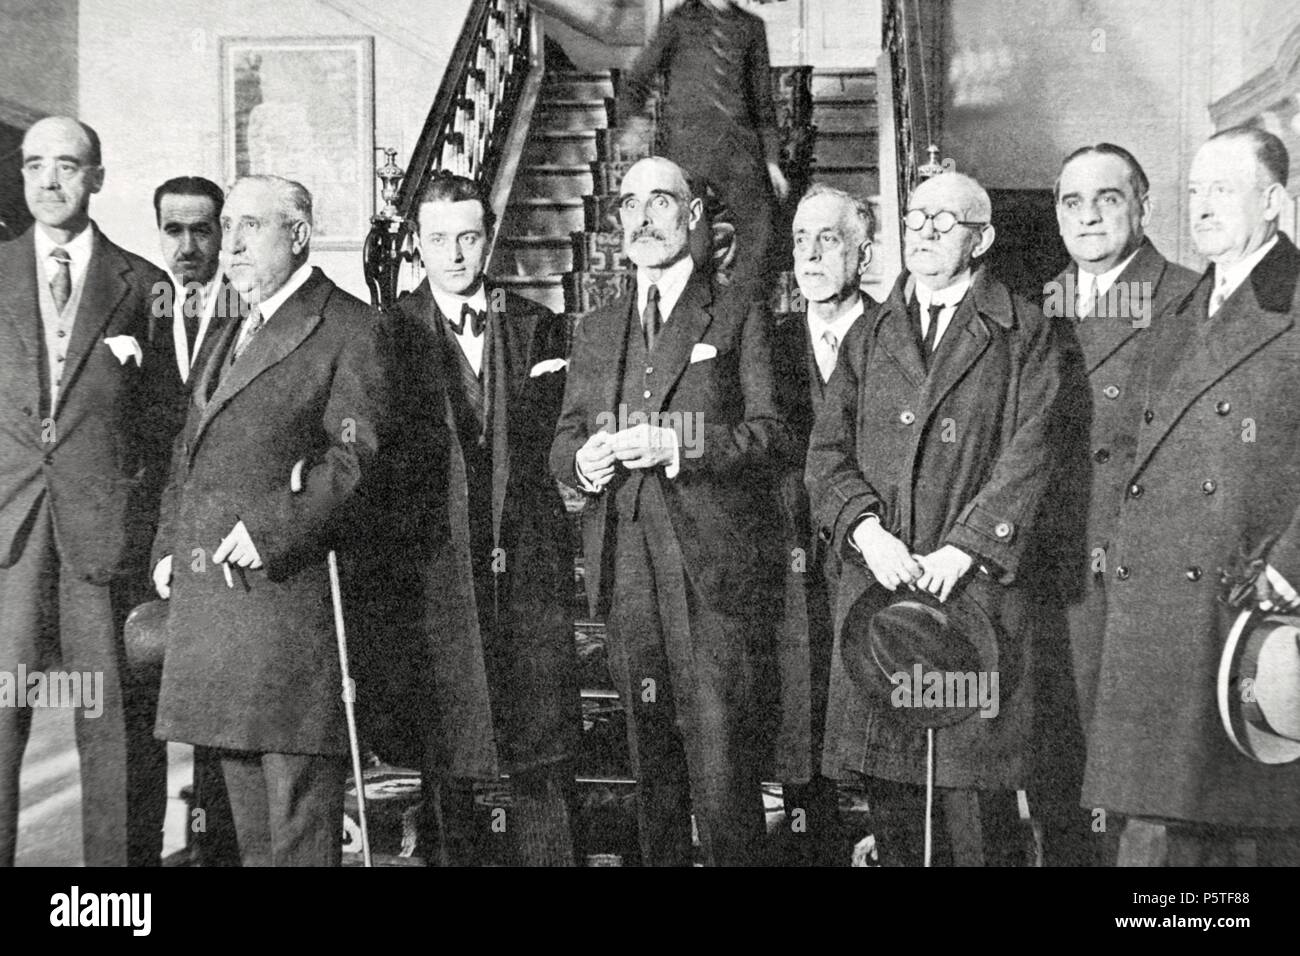 Francisco Cambo (1876-1947). Spanish politician, one of the main drivers of the conservative catalan nationalism. Regionalist League member. Cambo explaining to the reporters the formation of the Centre Party, which he preside. Cambo with the Duke of Maura, Silio, Goicoechea and Pinies, among others. 1930. Stock Photo